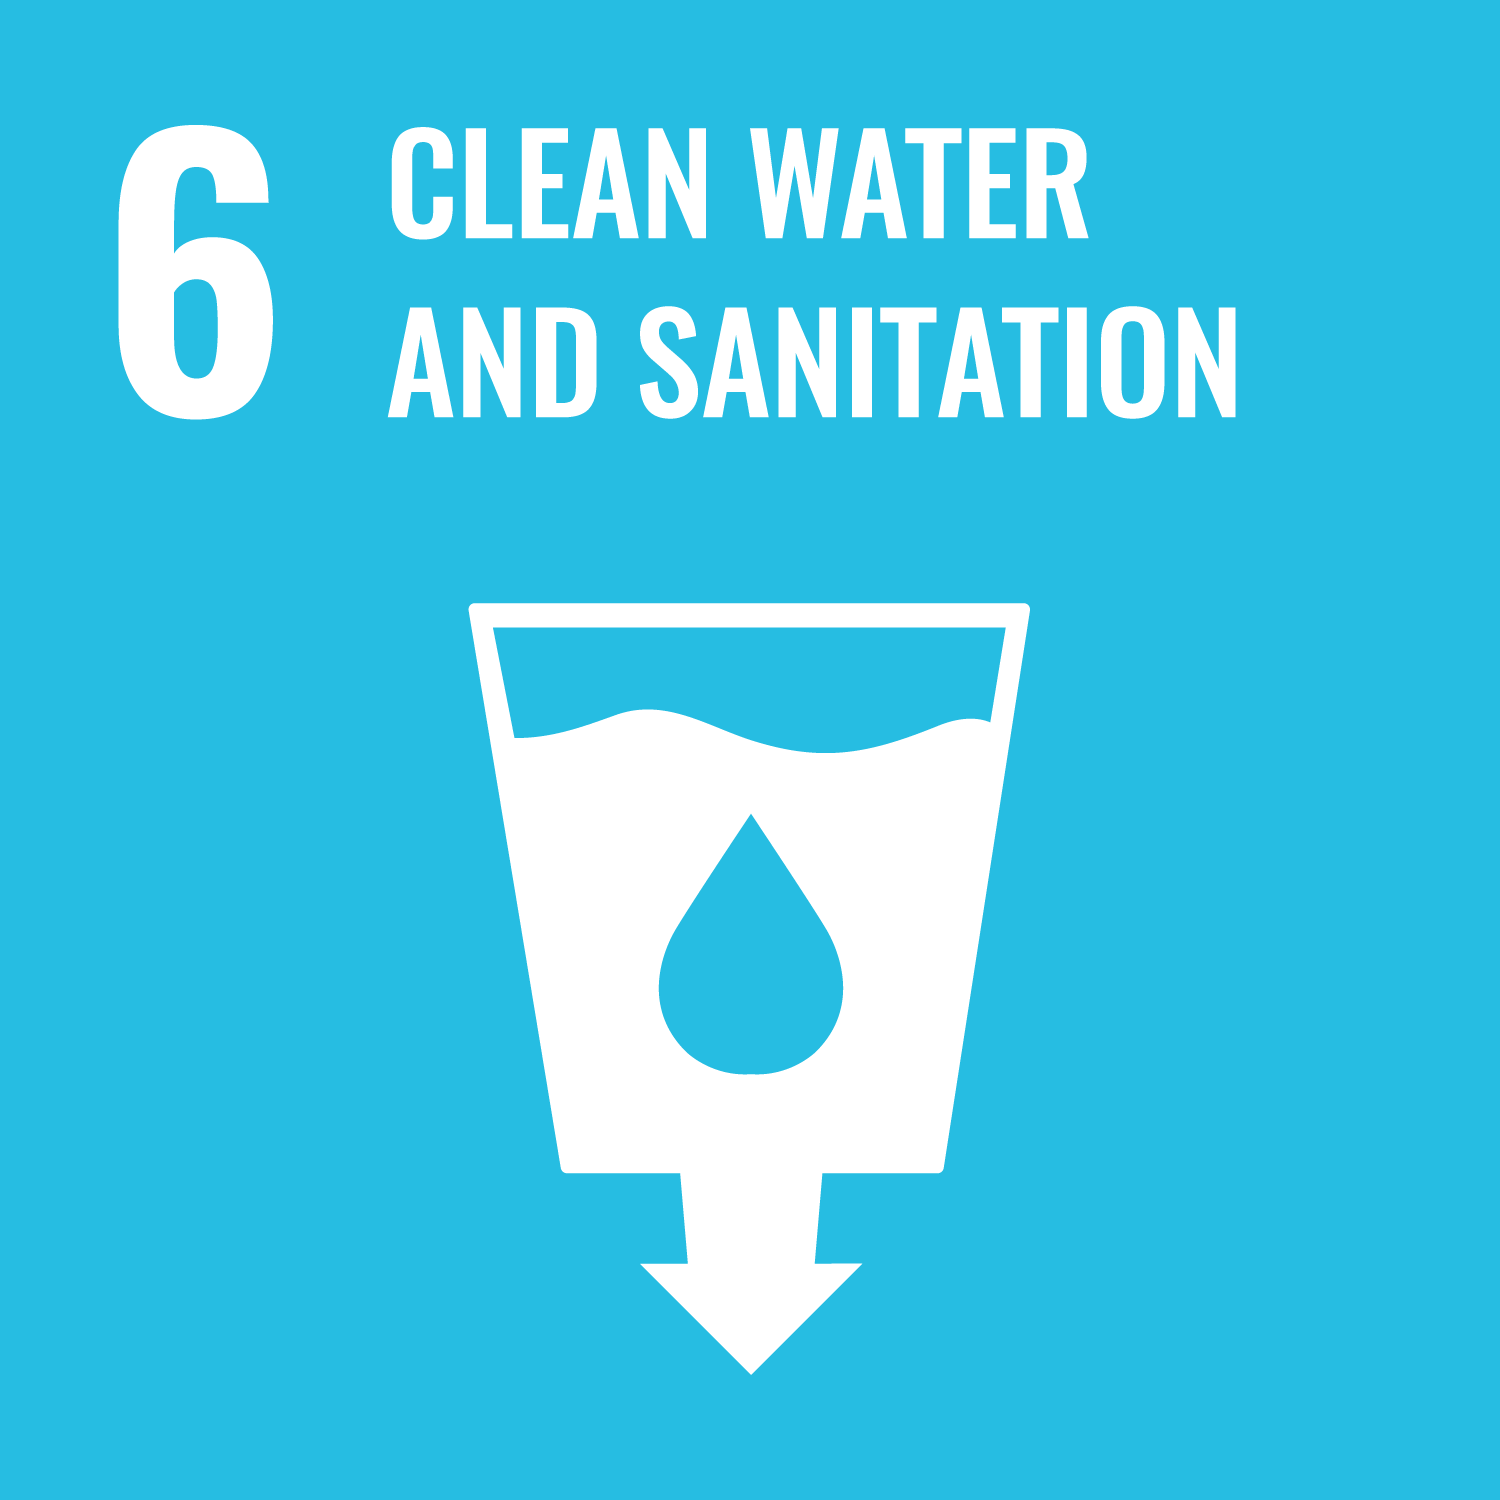 United Nation's 17 Sustainable Development Goals: Goal Number 6: Clean Water and Sanitation